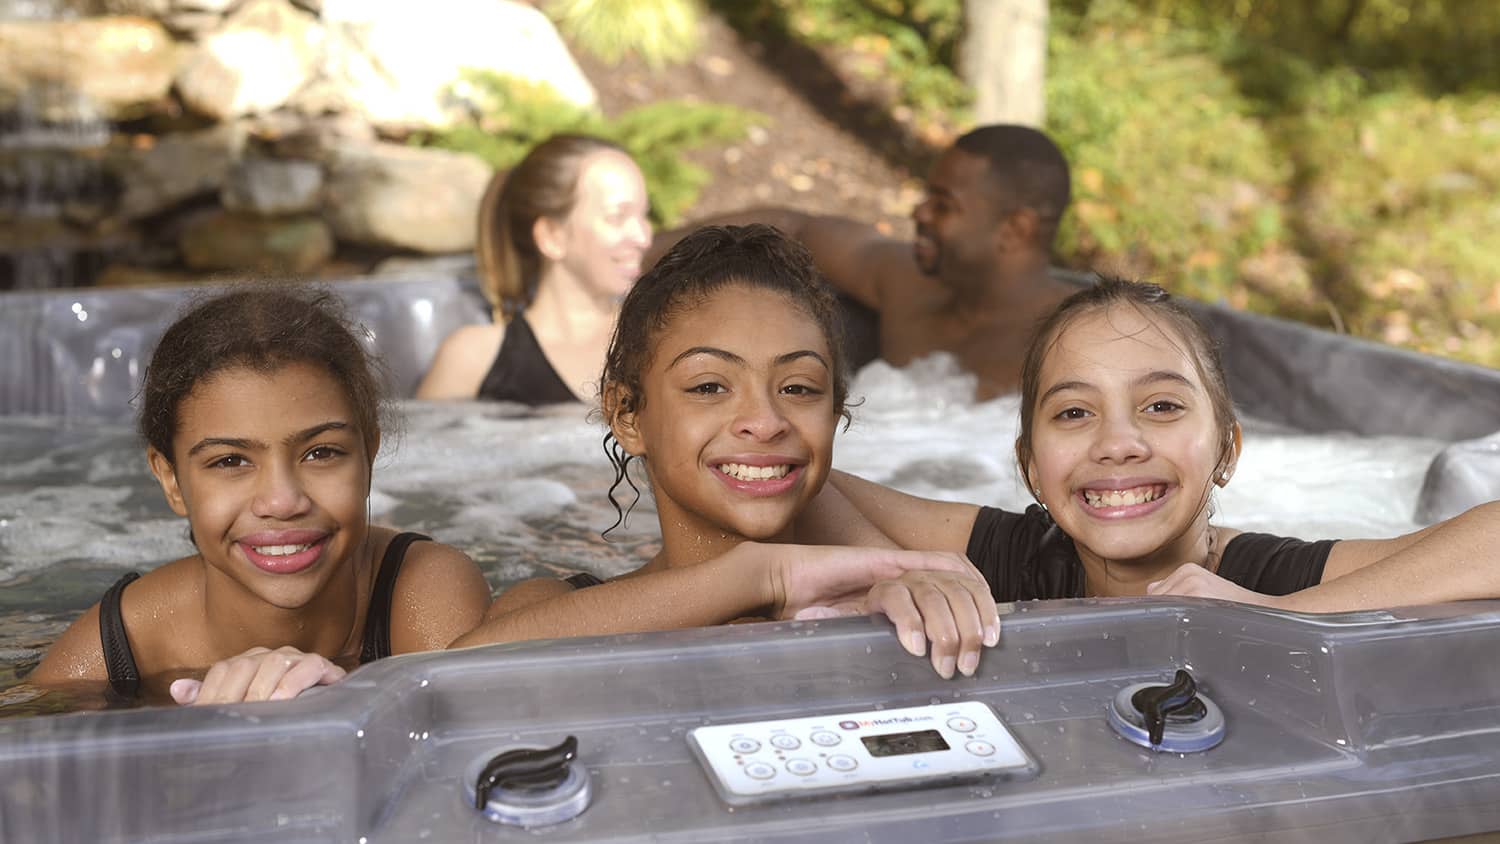 How Do You Keep Your Kids Safe Around Hot Tubs?-Kids-Family shot